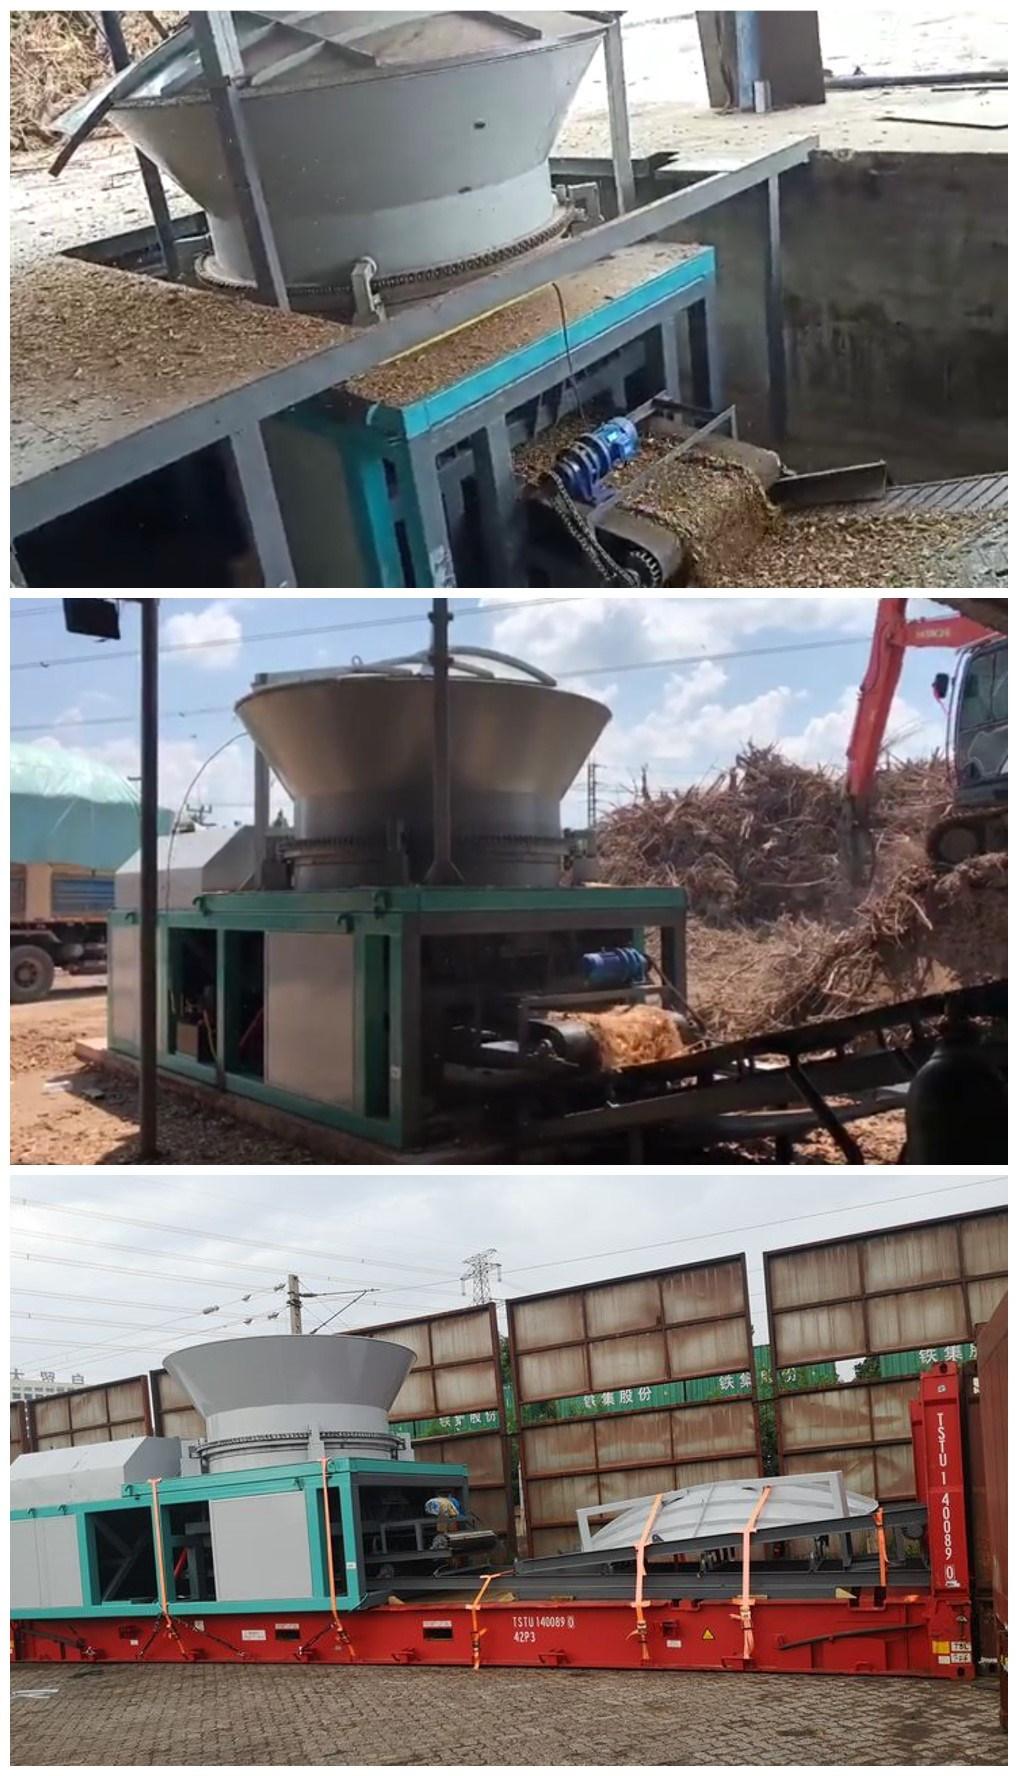 Professional Waste Wood Crusher Machine with 6 PCS Kinfes